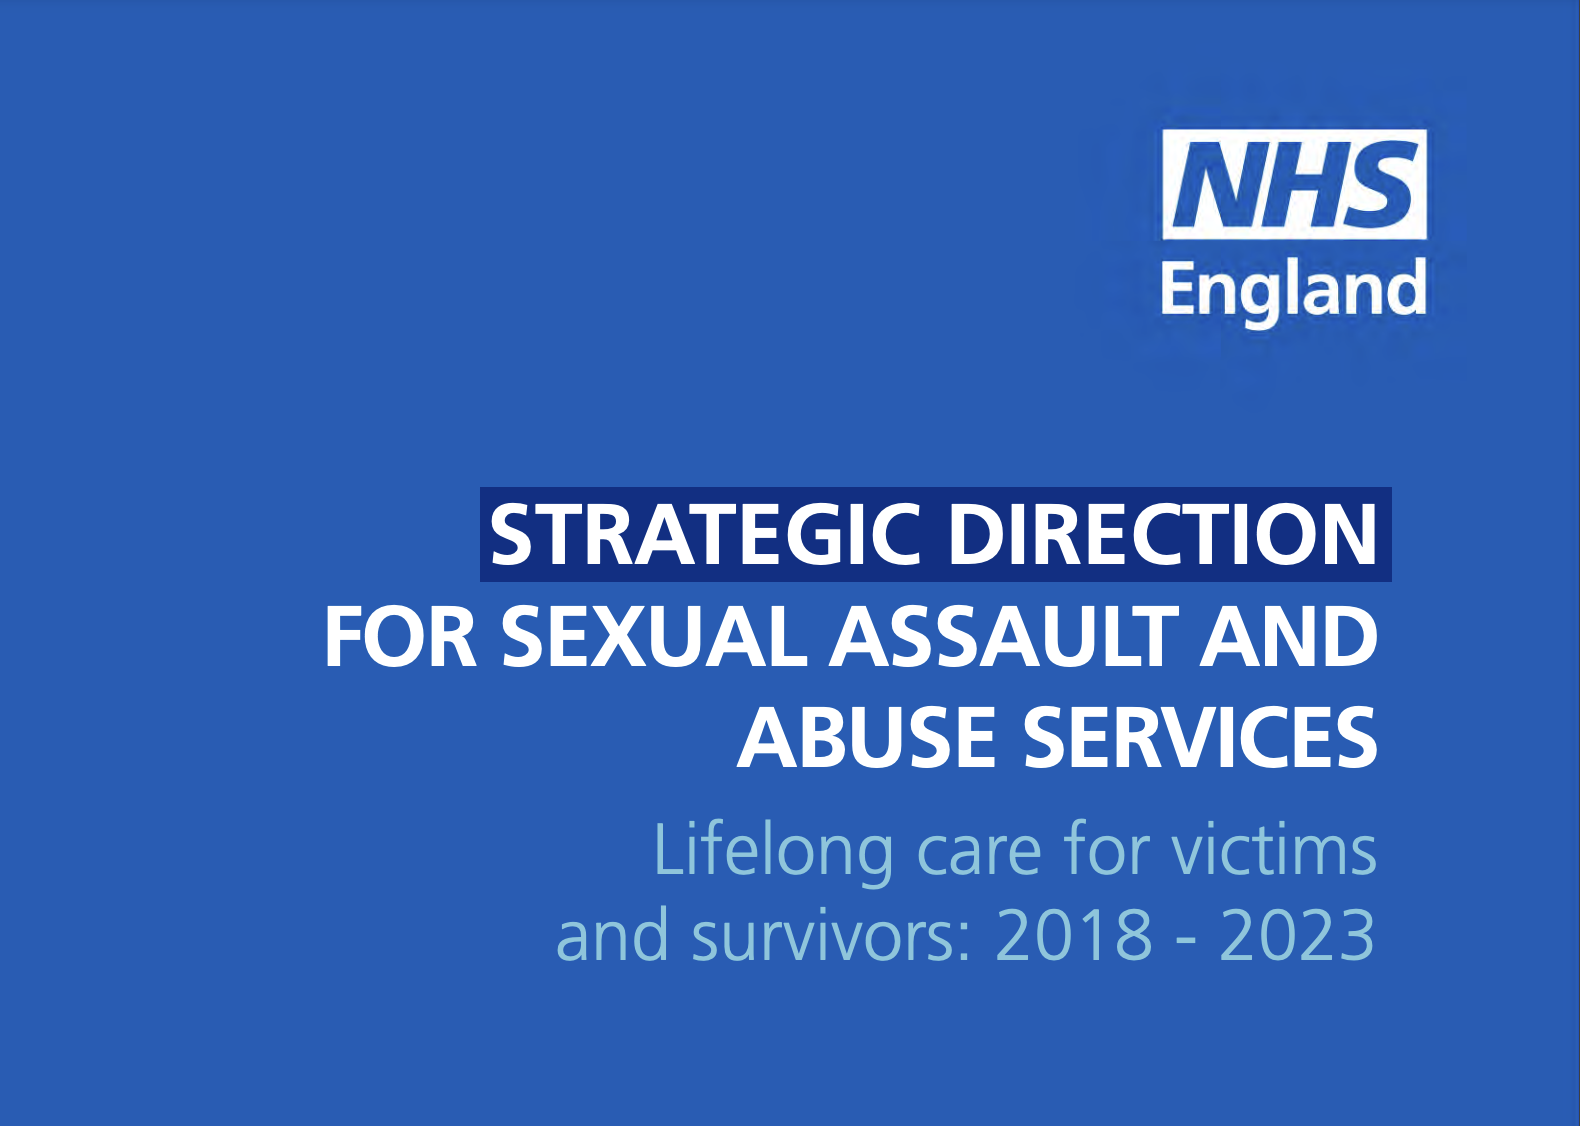 Strategic Direction for Sexual Assault and Abuse Services report